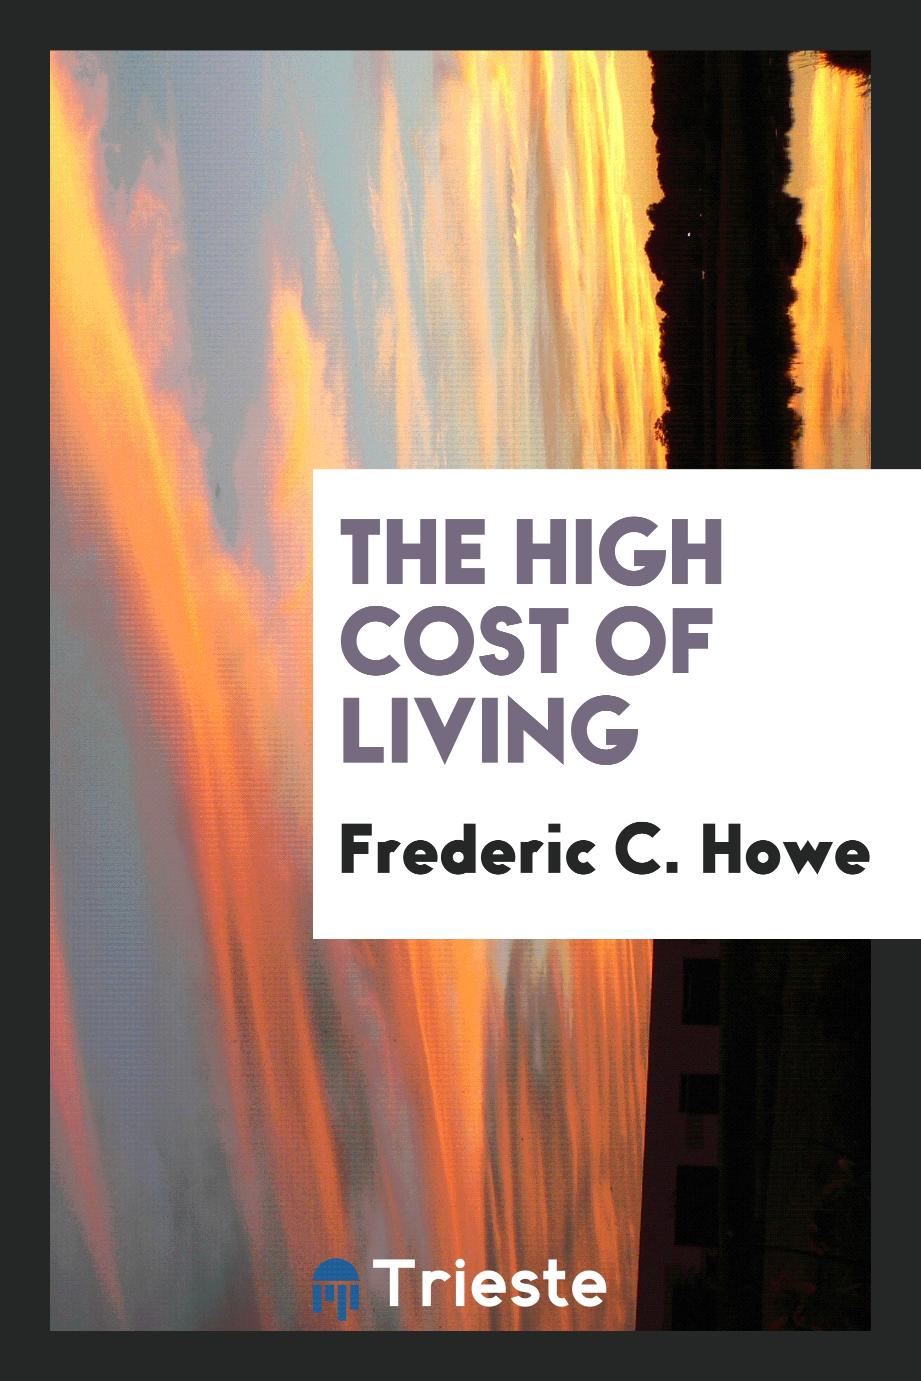 The high cost of living